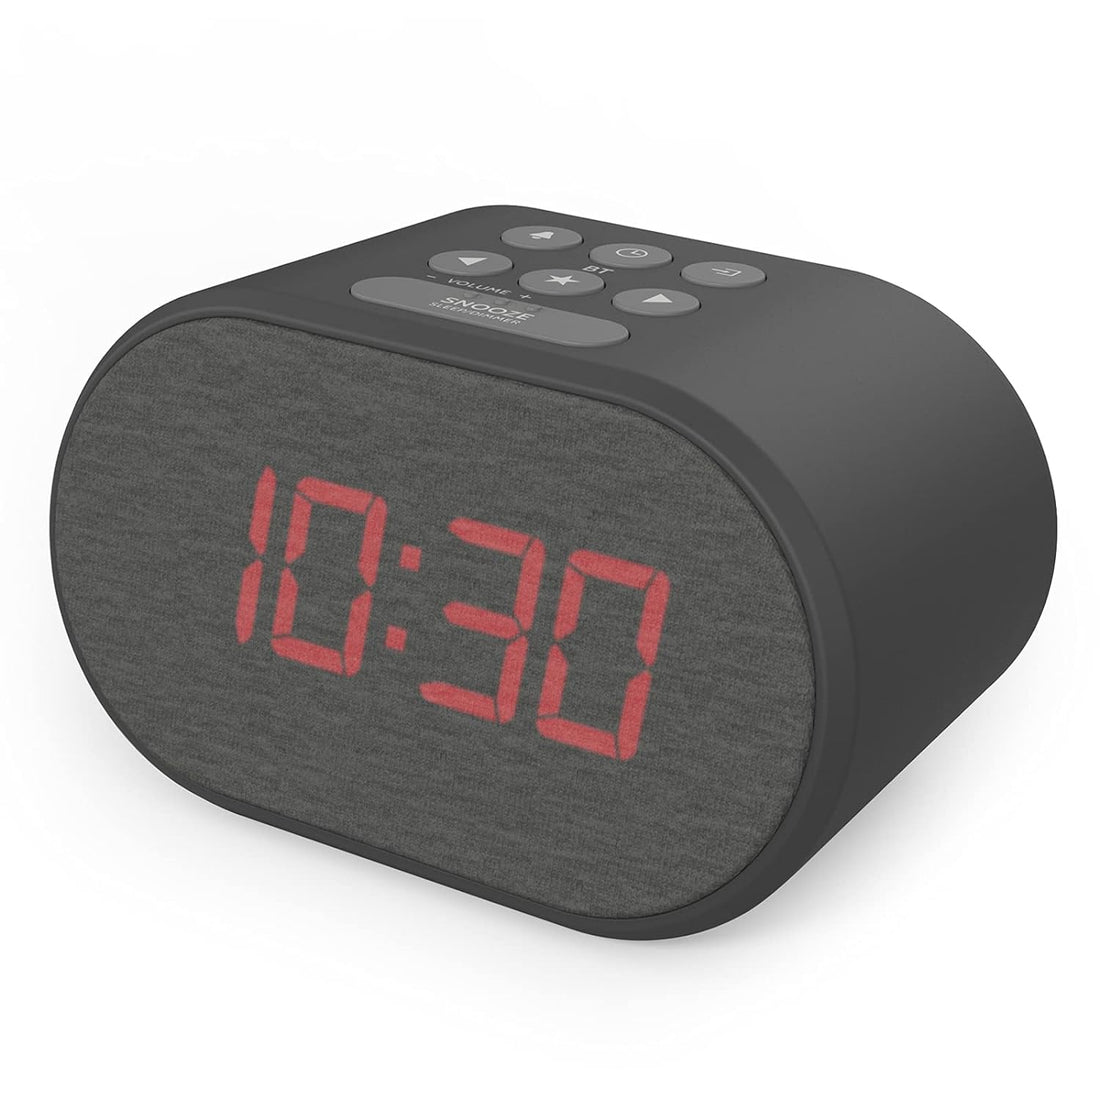 Alarm Clock Bedside Non Ticking LED Backlit Alarm Clock with USB Charger & FM Radio, 5 Step Dimmable Display - Wall Outlet Powered with Battery Backup (Black)